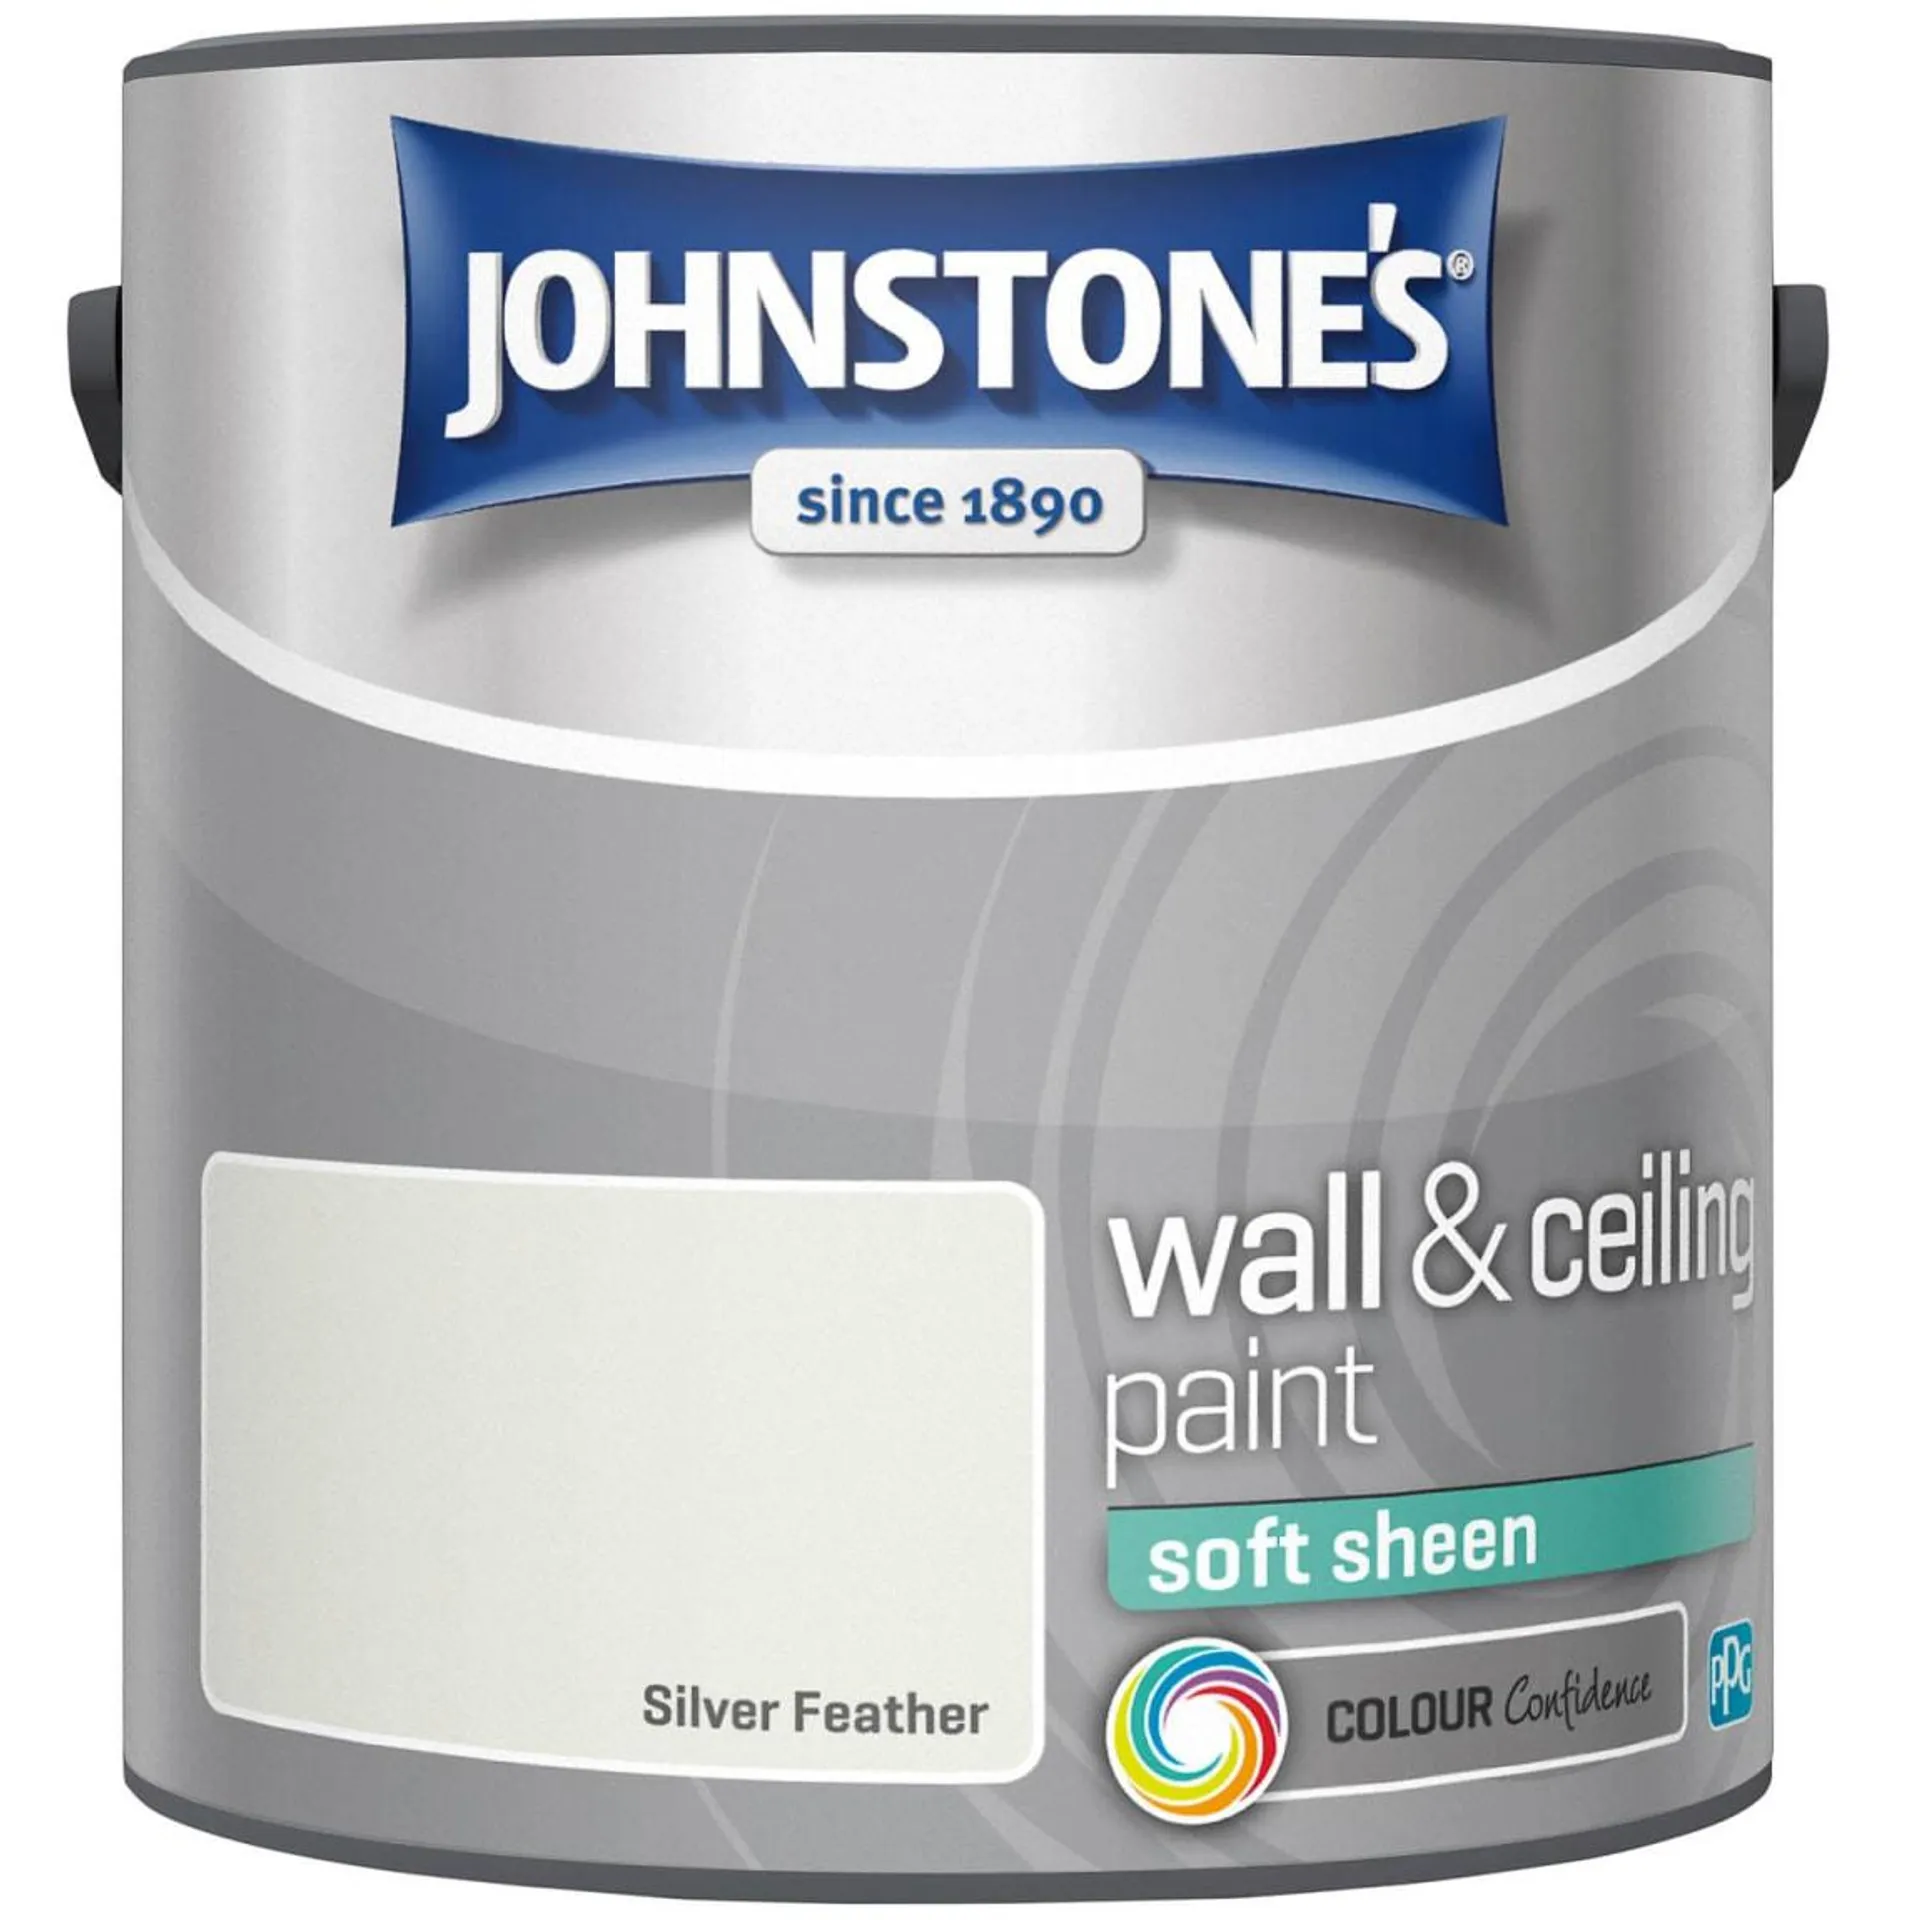 Johnstone's Paint Soft Sheen Emulsion 2.5L - Silver Feather